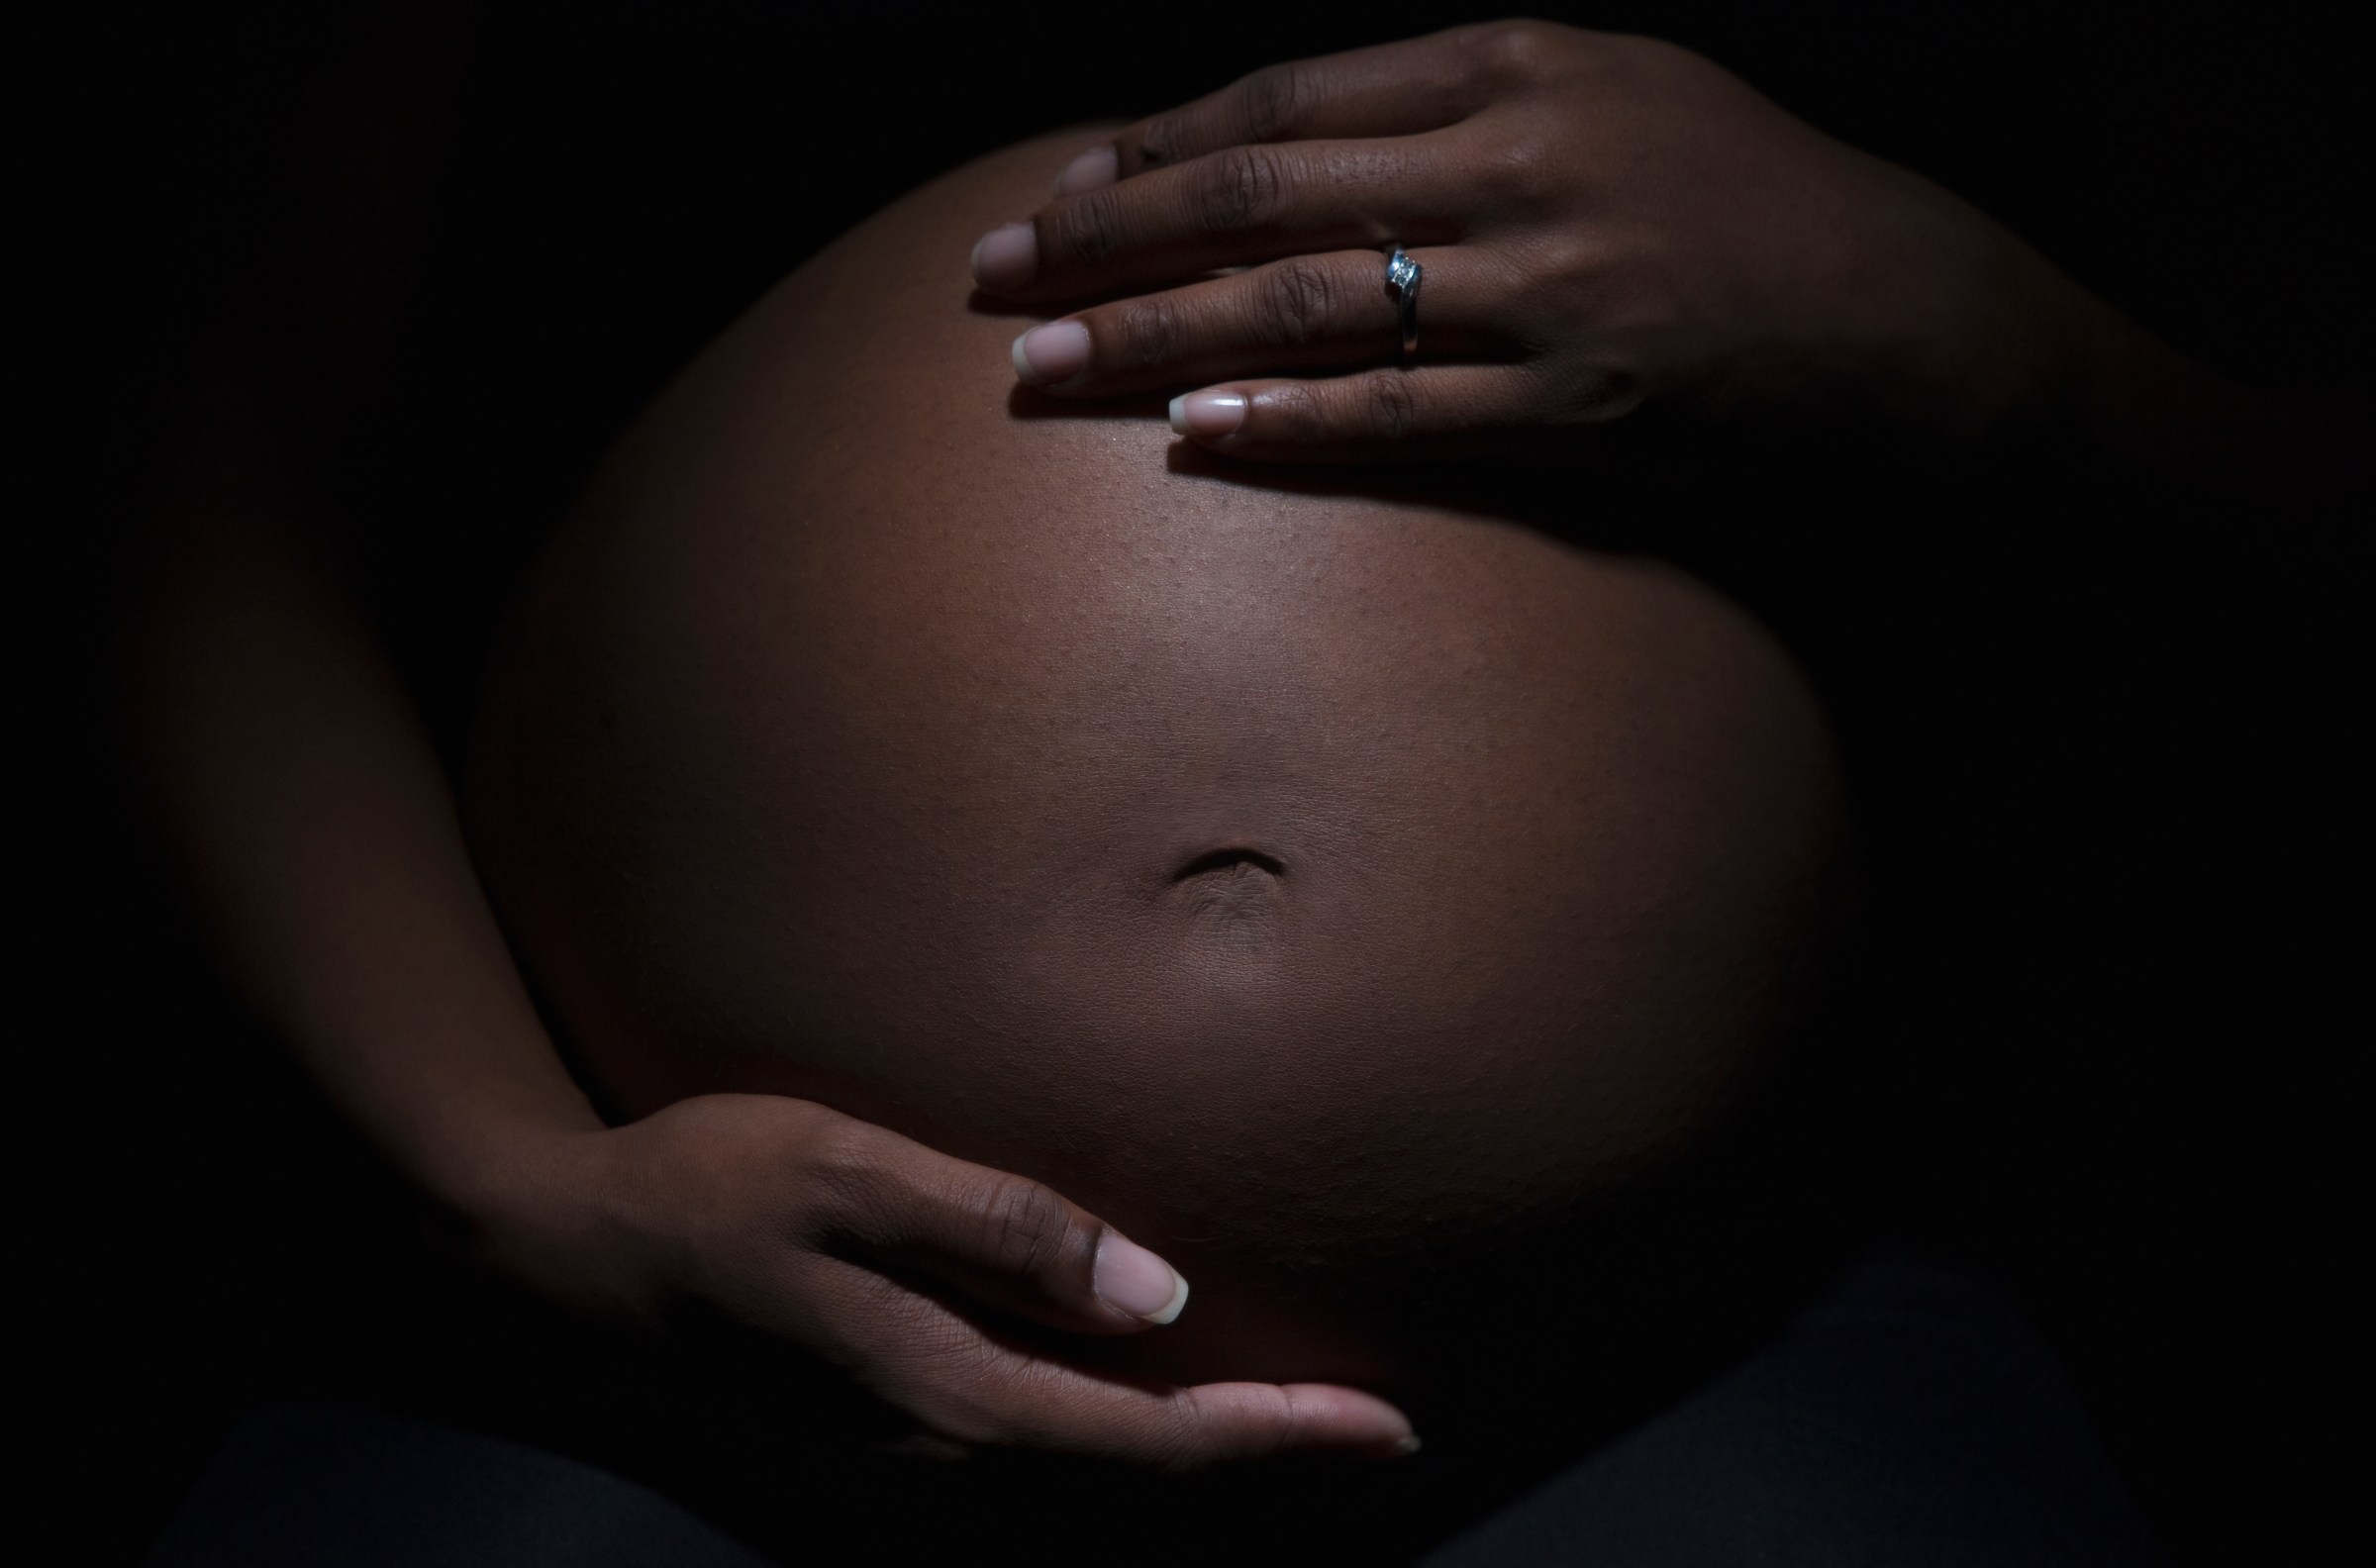 Pregnancy in America is starting to feel like a crime